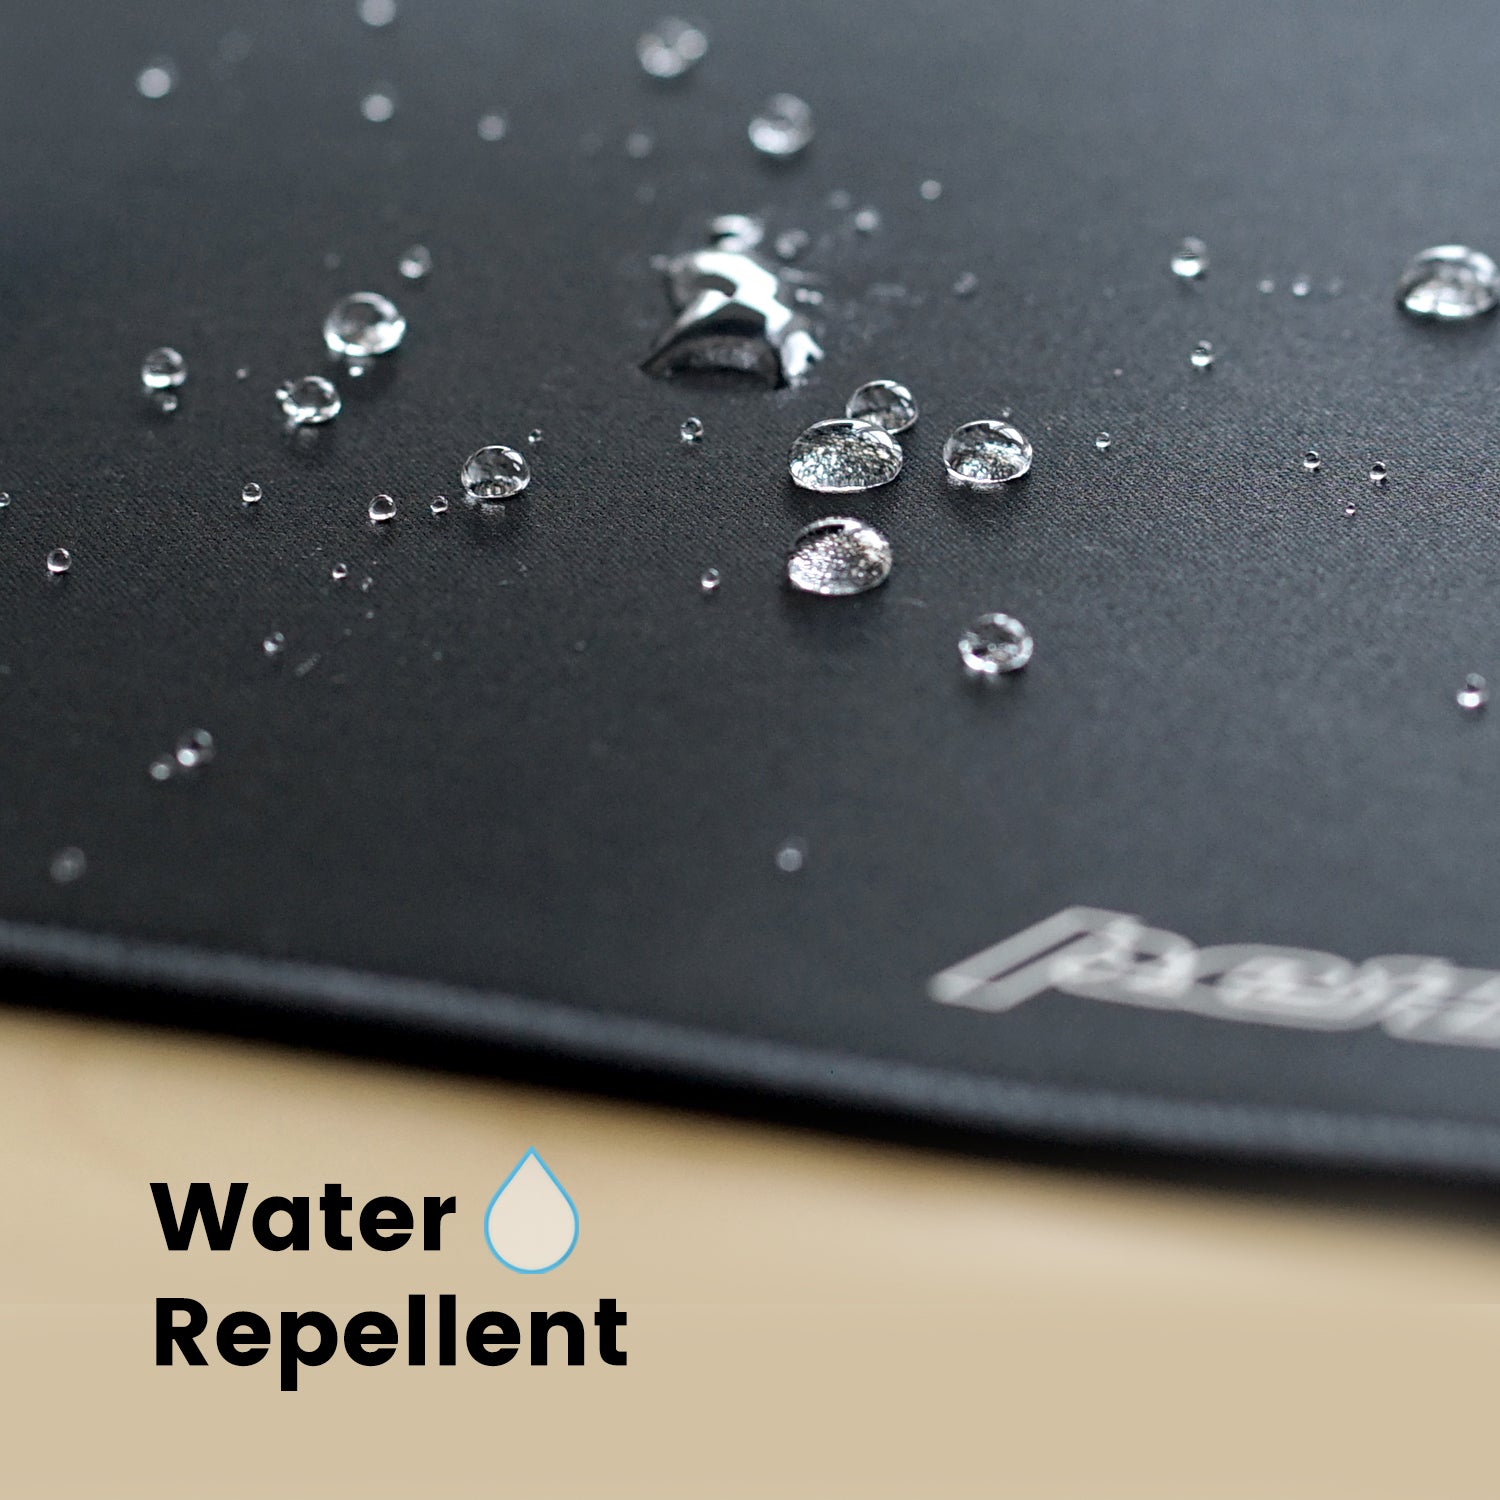 DX - 1000 - Mouse Pad Stitched Edges Waterproof - Perixx Europe